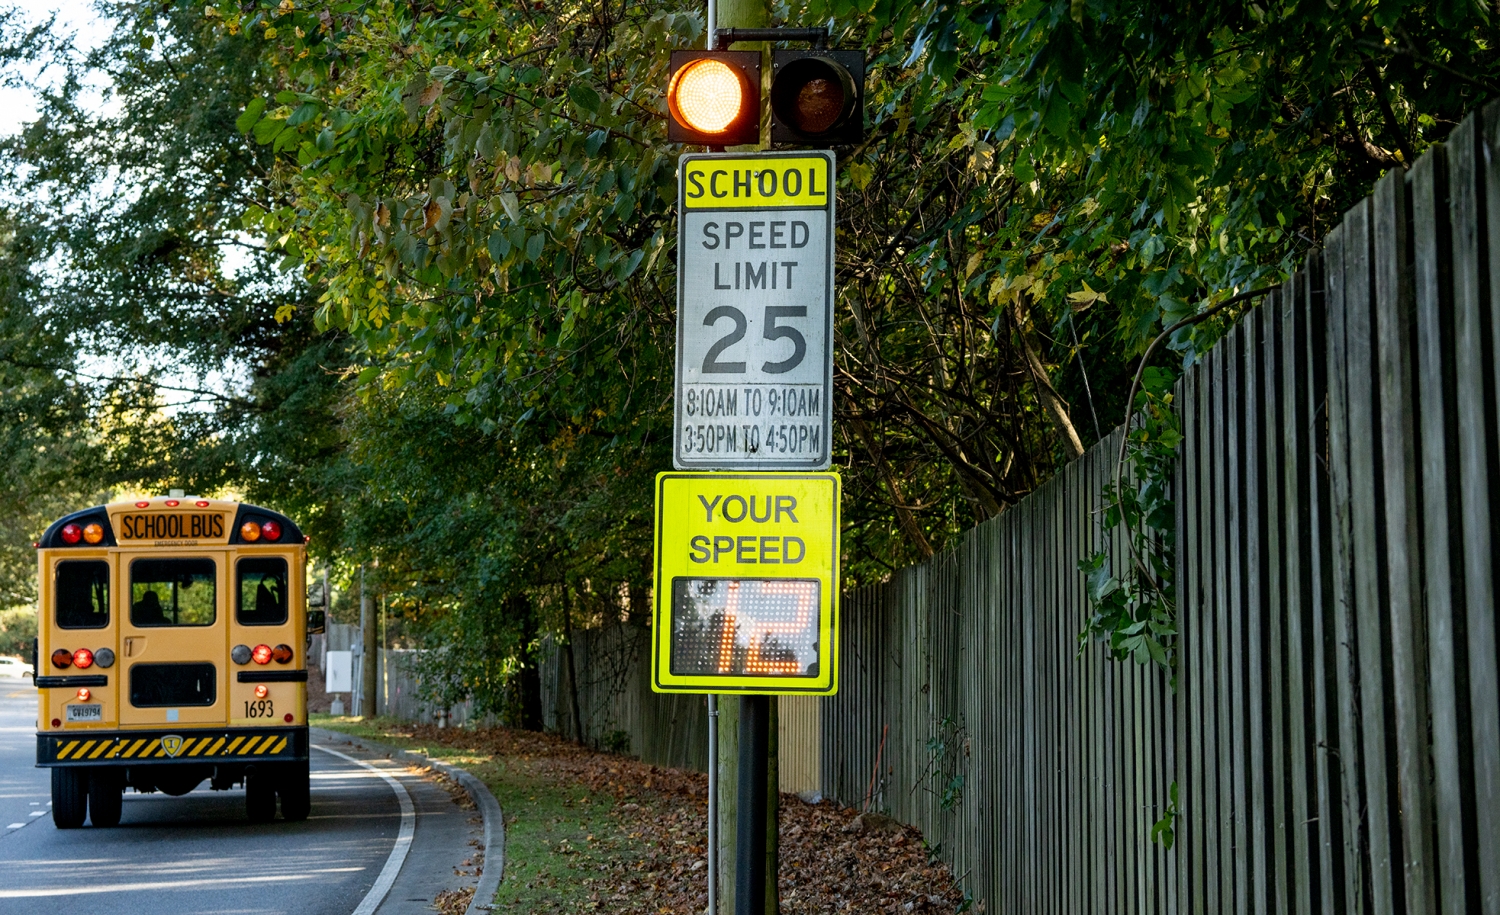 Audi’s C-V2X application is expected to warn drivers when they are approaching a school bus (Credit: Audi of America)